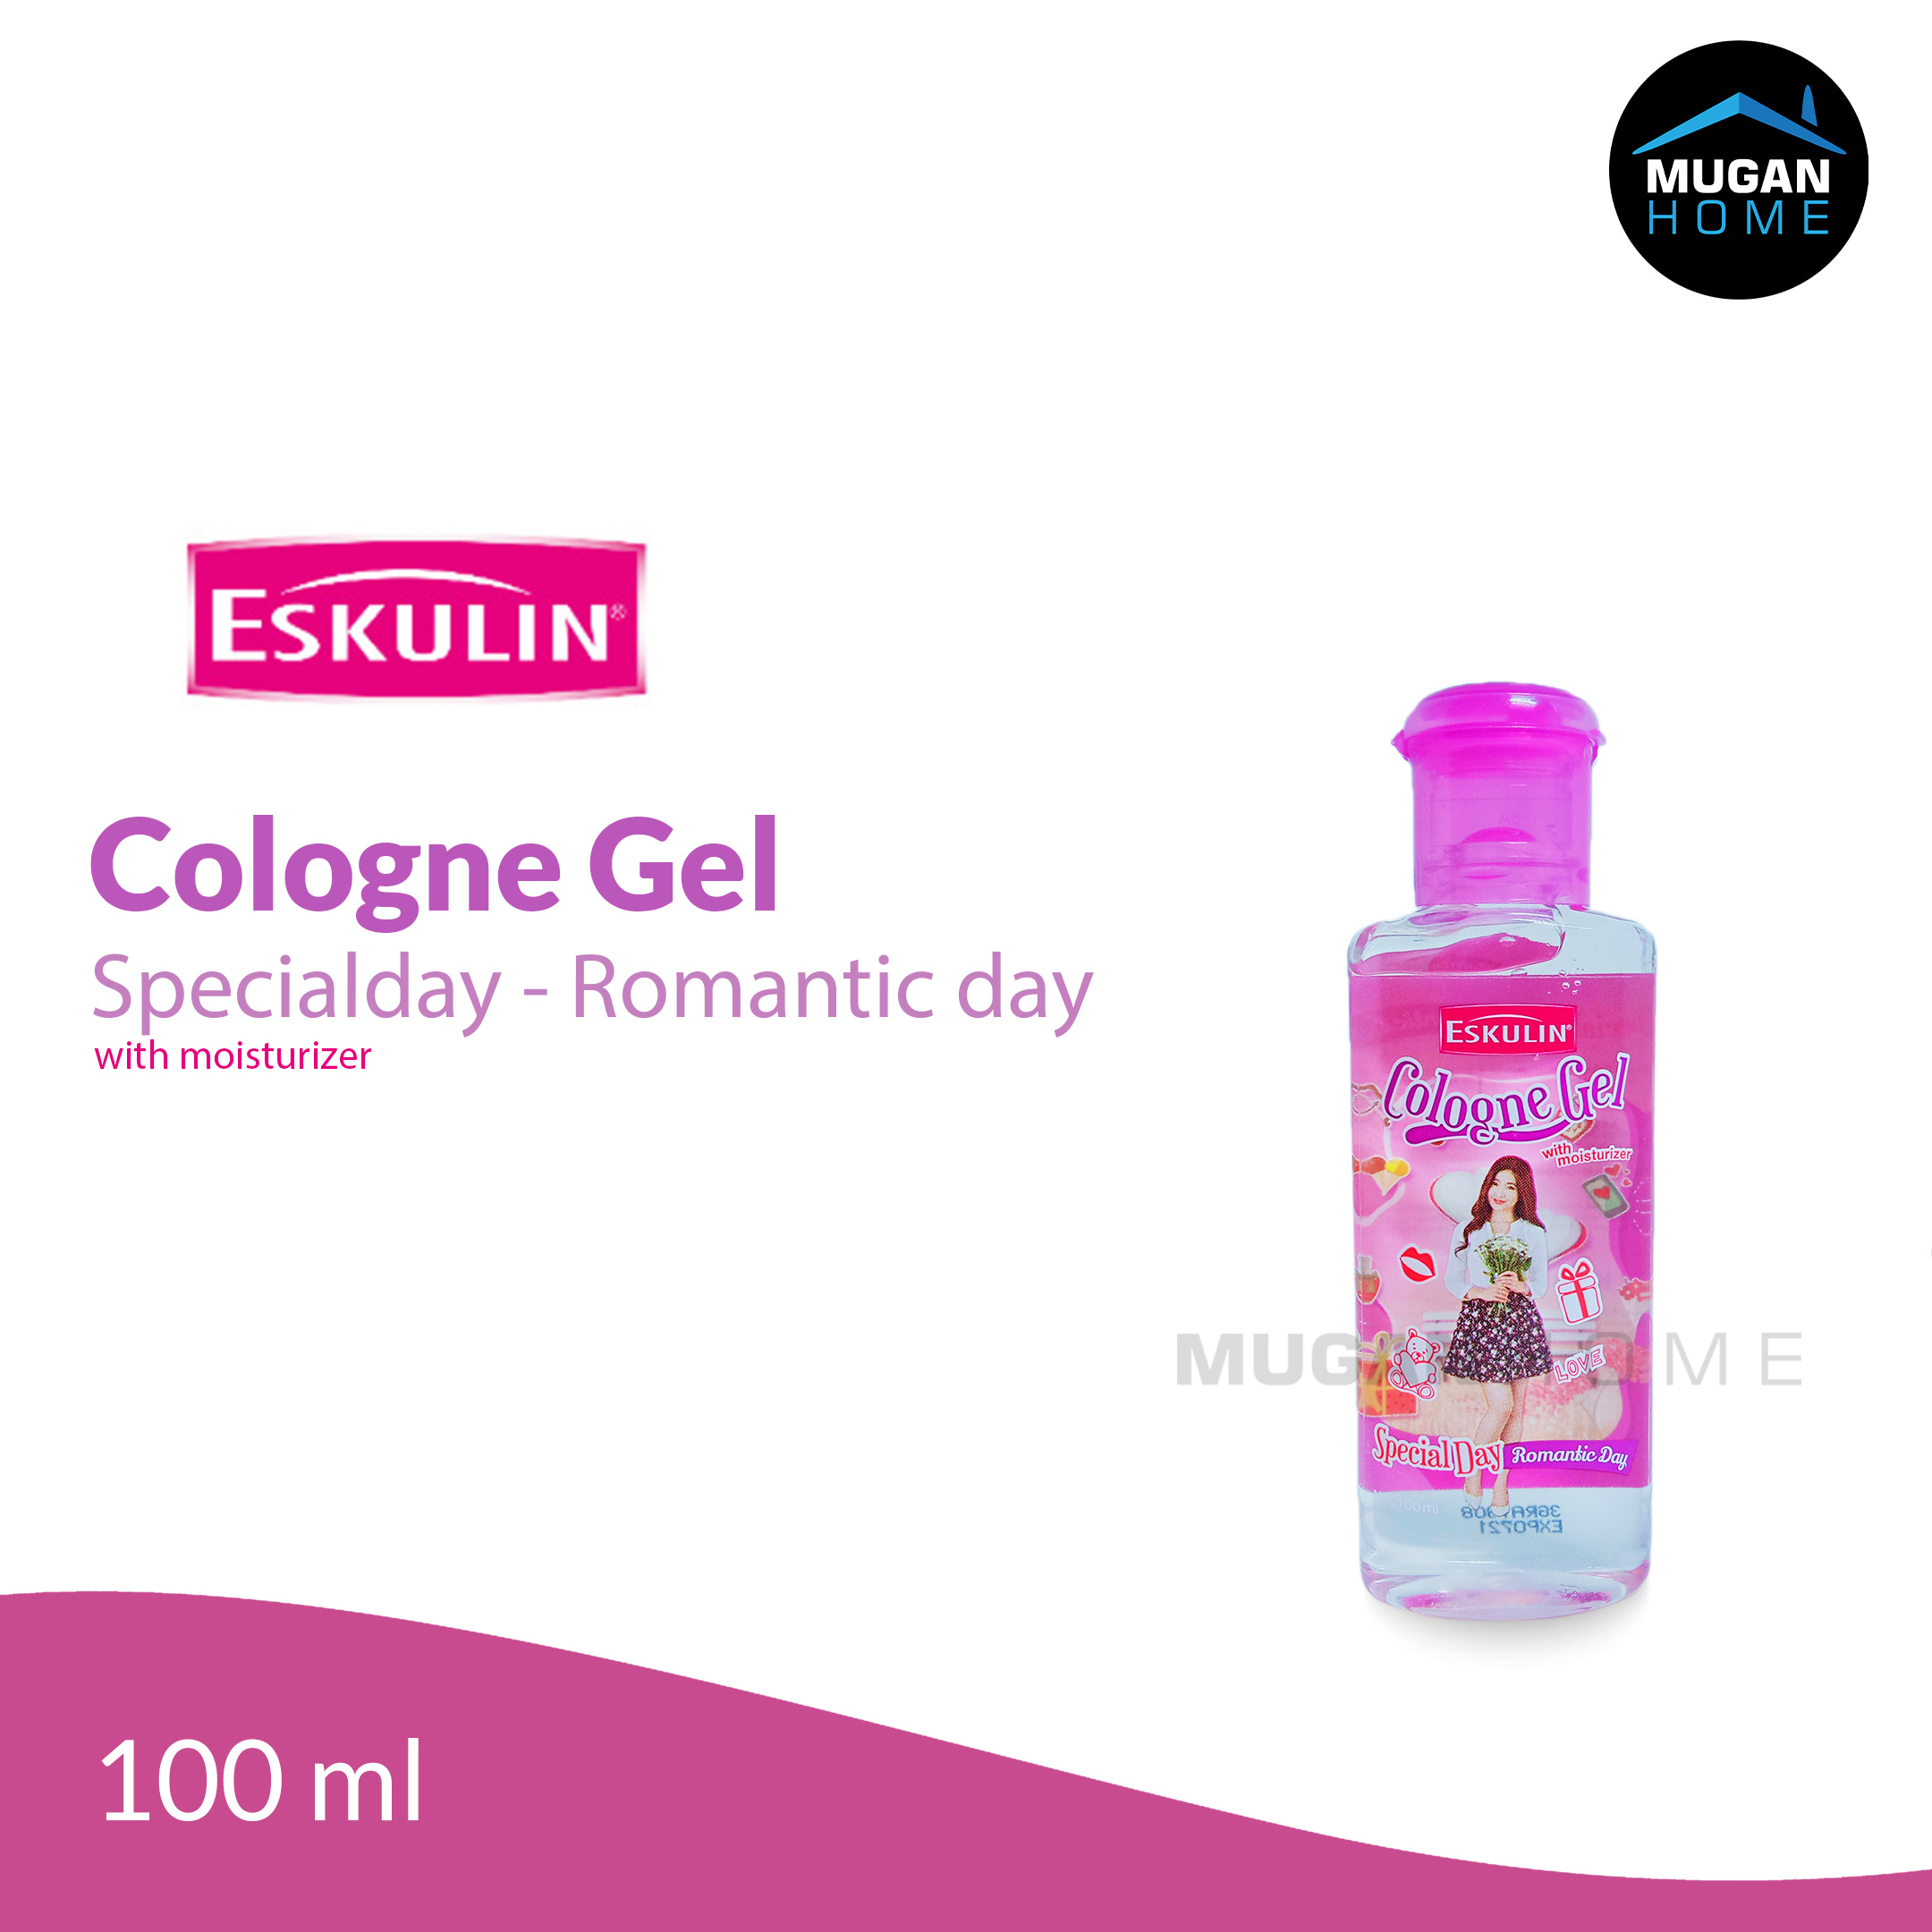 ESKULIN COLOGNE GEL 100ML SPECIAL DAY ROMANTIC DAY